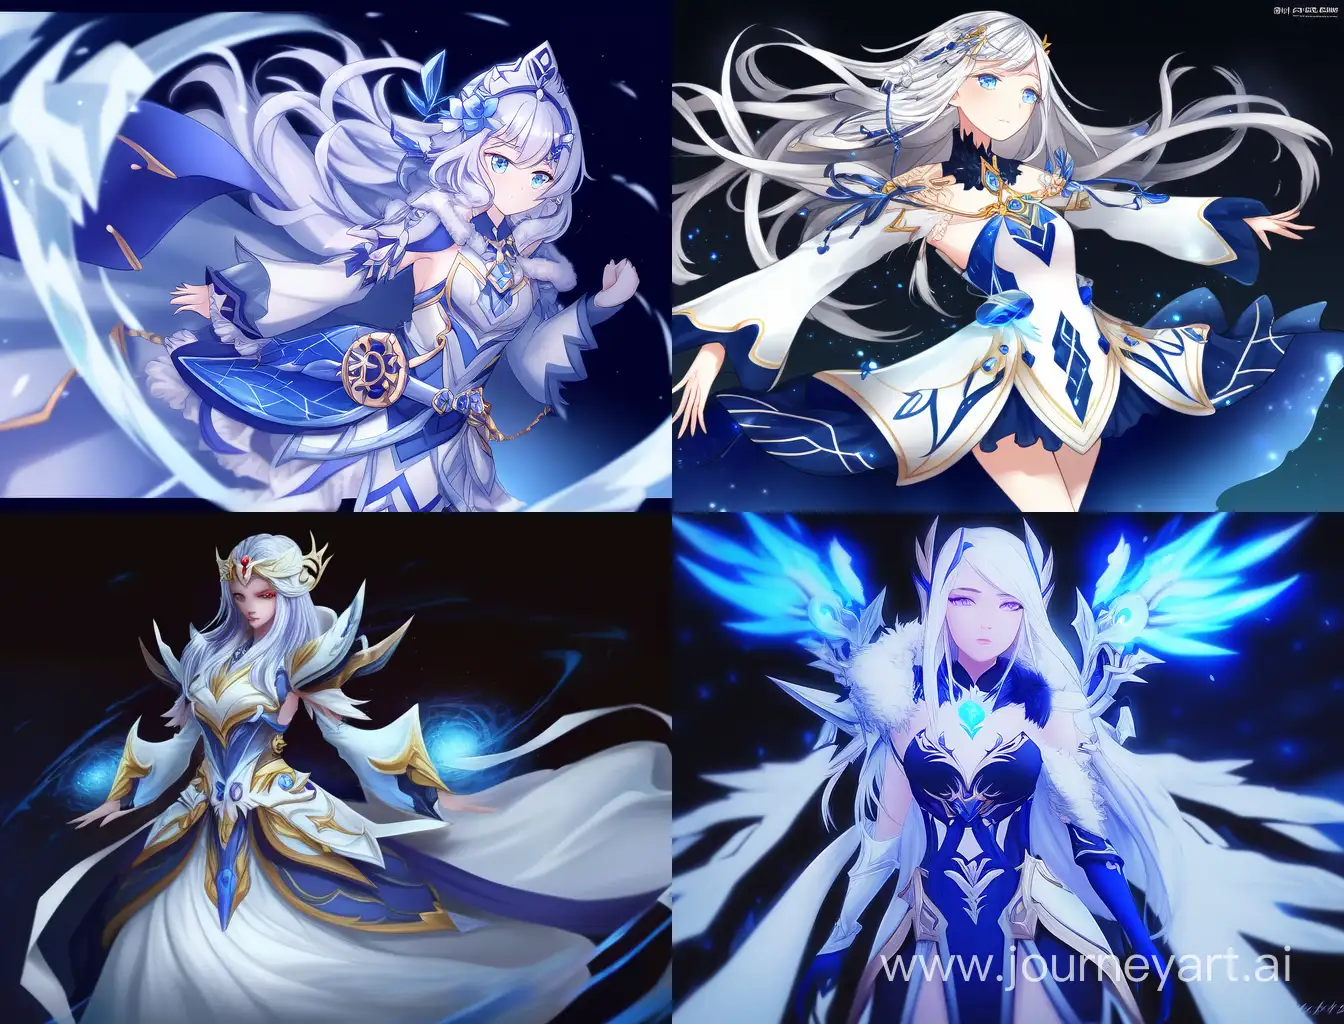 Female, around 18 years old, height around 160cm, slim body, white hair with blue streaks, blue eyes with white streaks, manhwa art style, pose like Mona Lisa, beautiful white and blue medieval fantasy dress